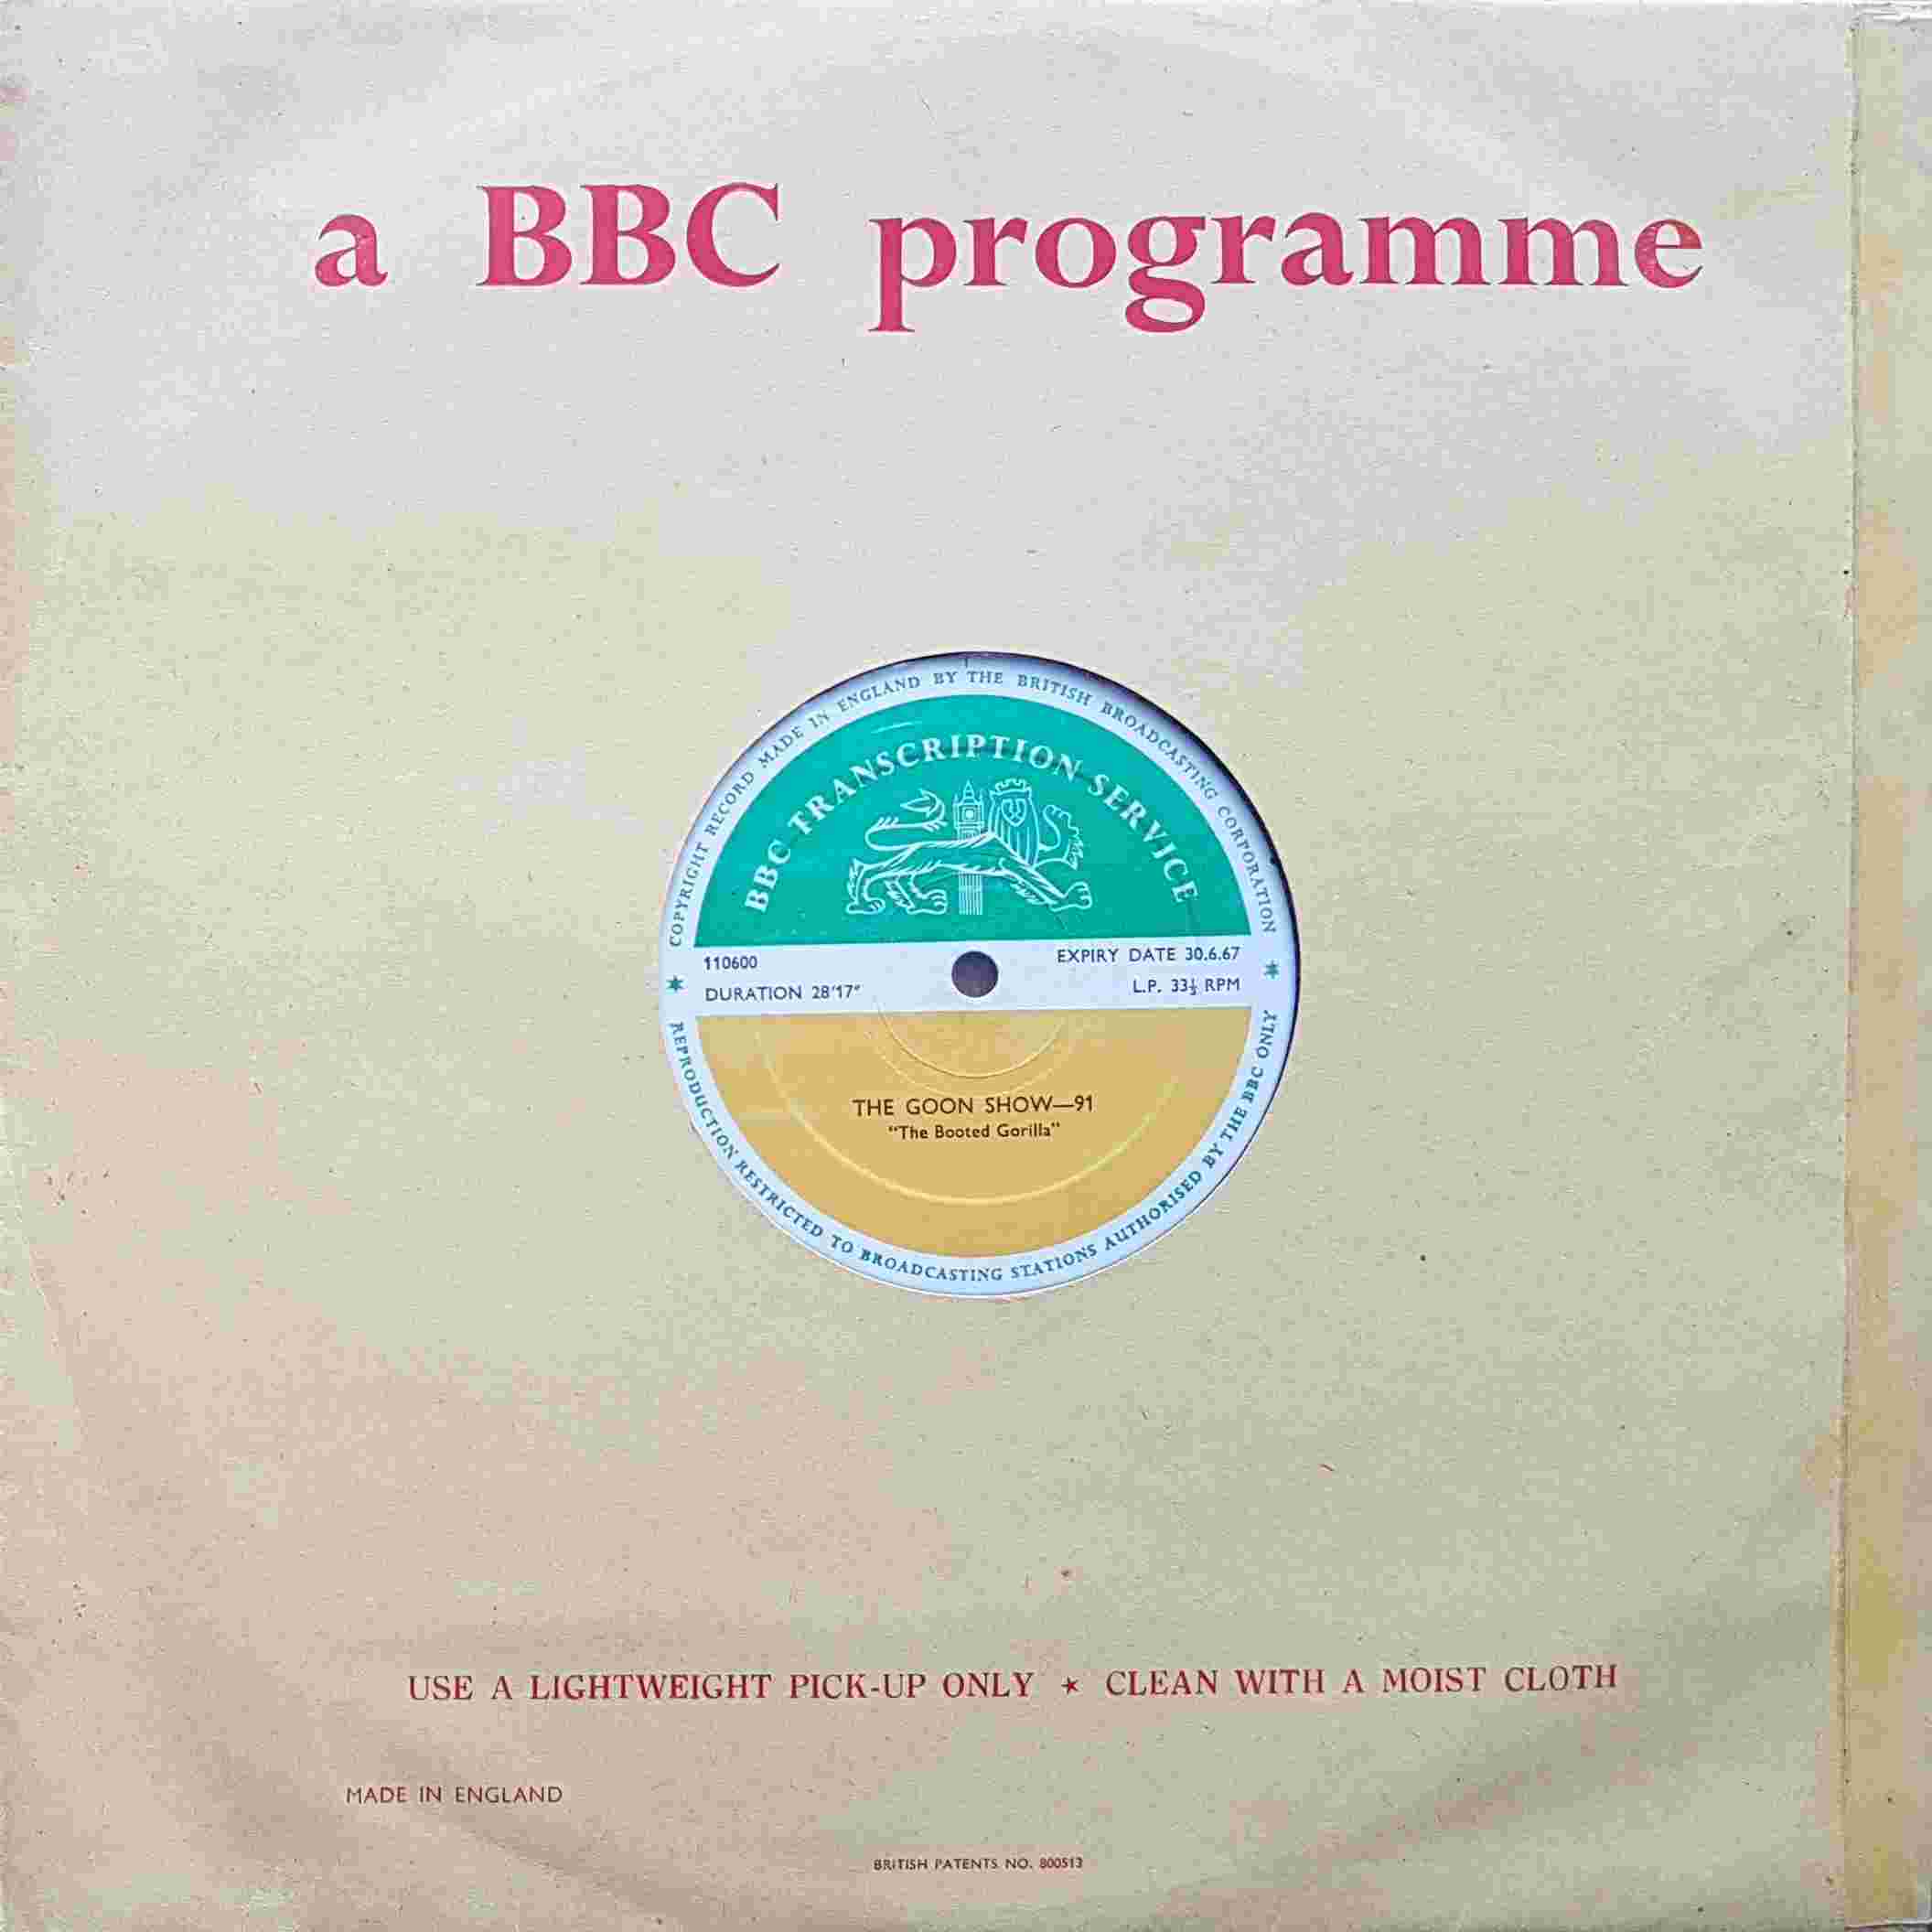 Picture of 110600 The Goon show - 91 & 92 by artist Spike Milligan / Eric Sykes from the BBC albums - Records and Tapes library